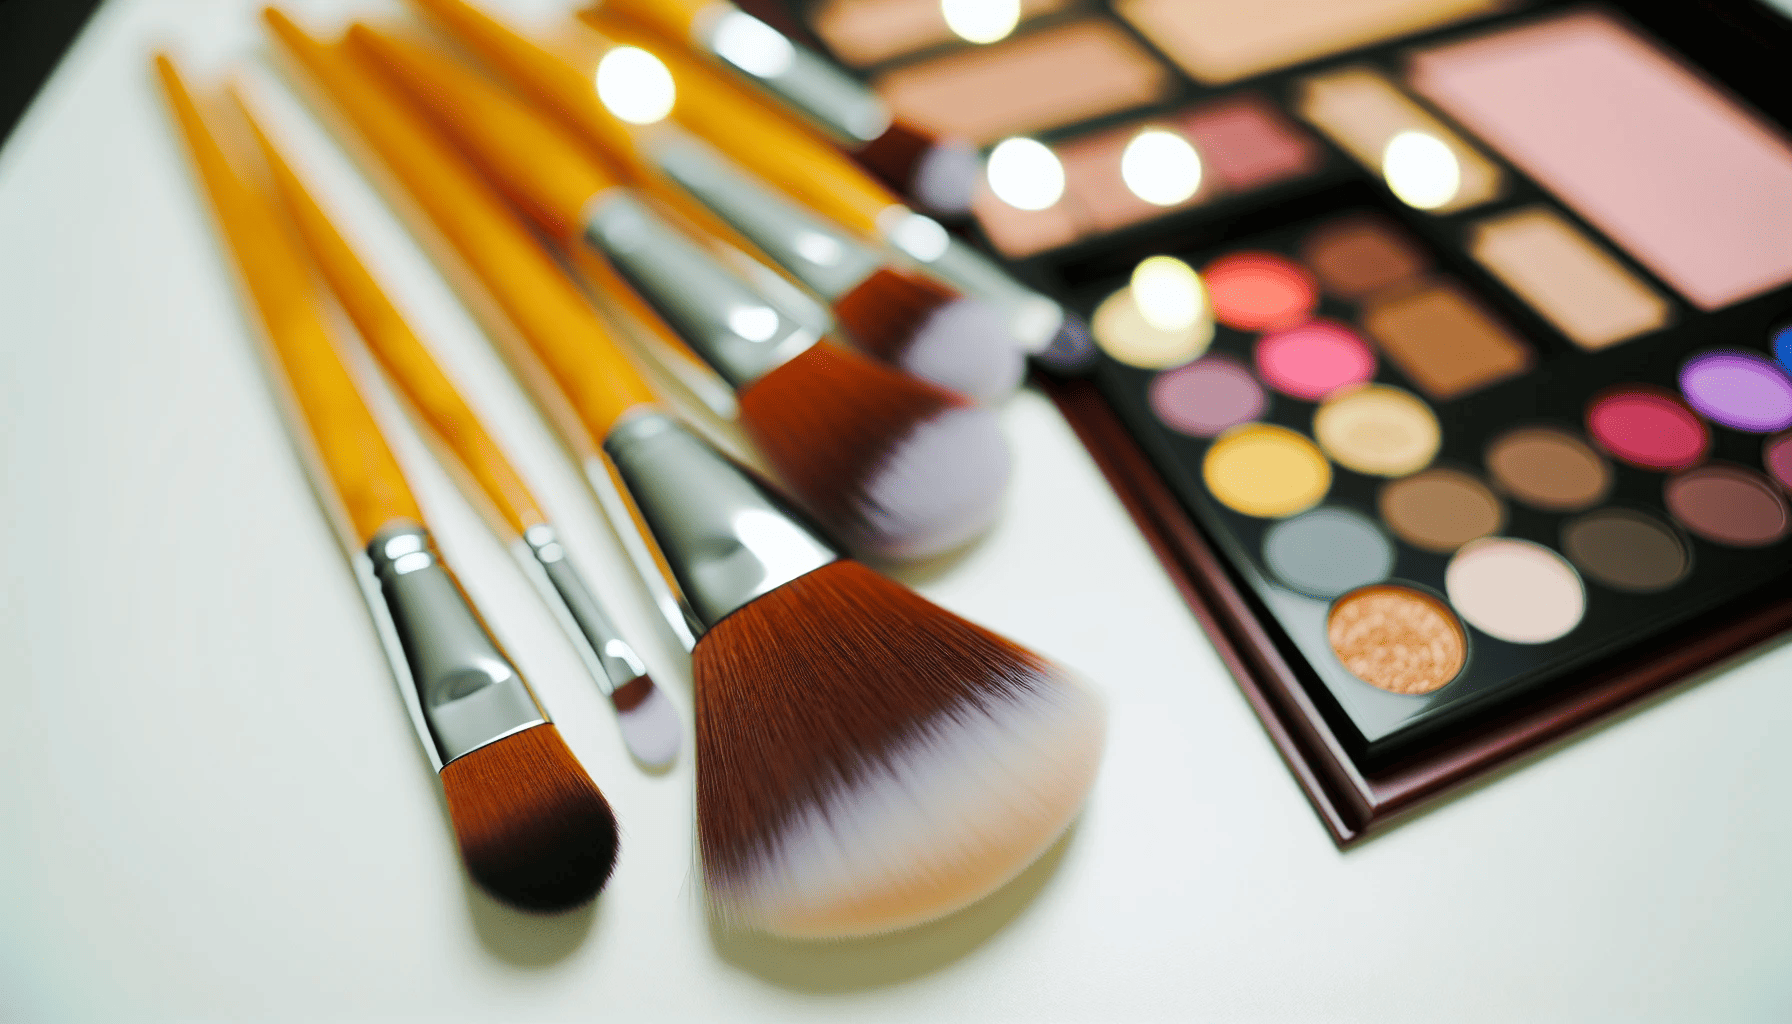 Professional makeup brushes and palette